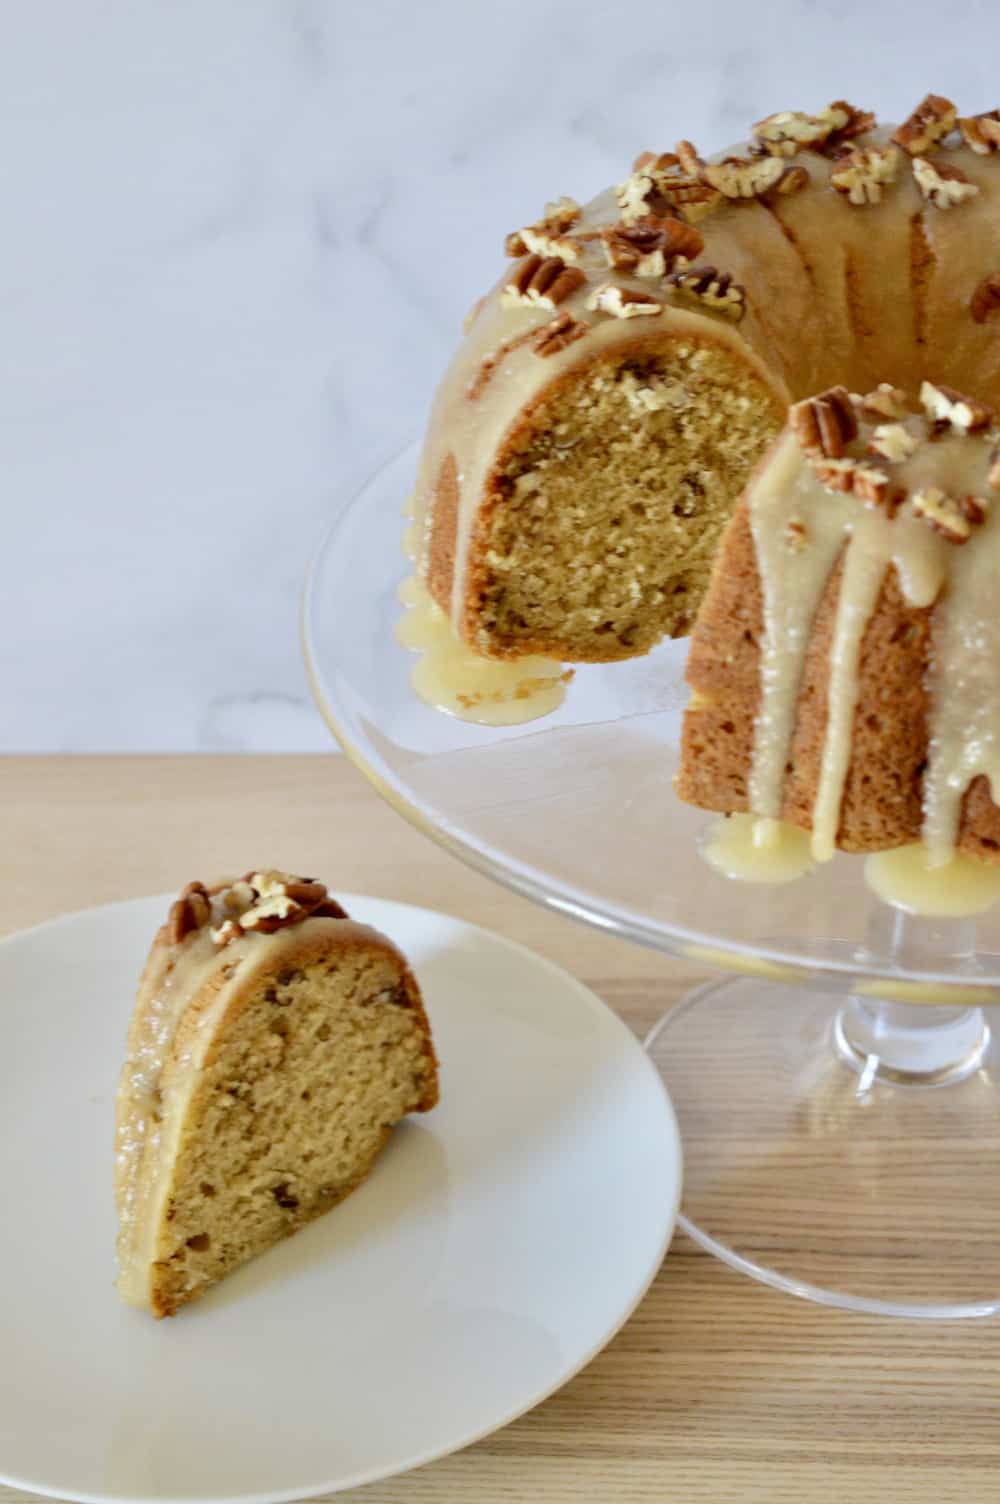 Bourbon Pecan Banana Bundt Cake with a Bourbon Butter Glaze! So moist and delicious, it's the best way to use up those ripe bananas! #bourbonpecan #bananabundtcake with bourbon butter frosting on a glass pedestal. 